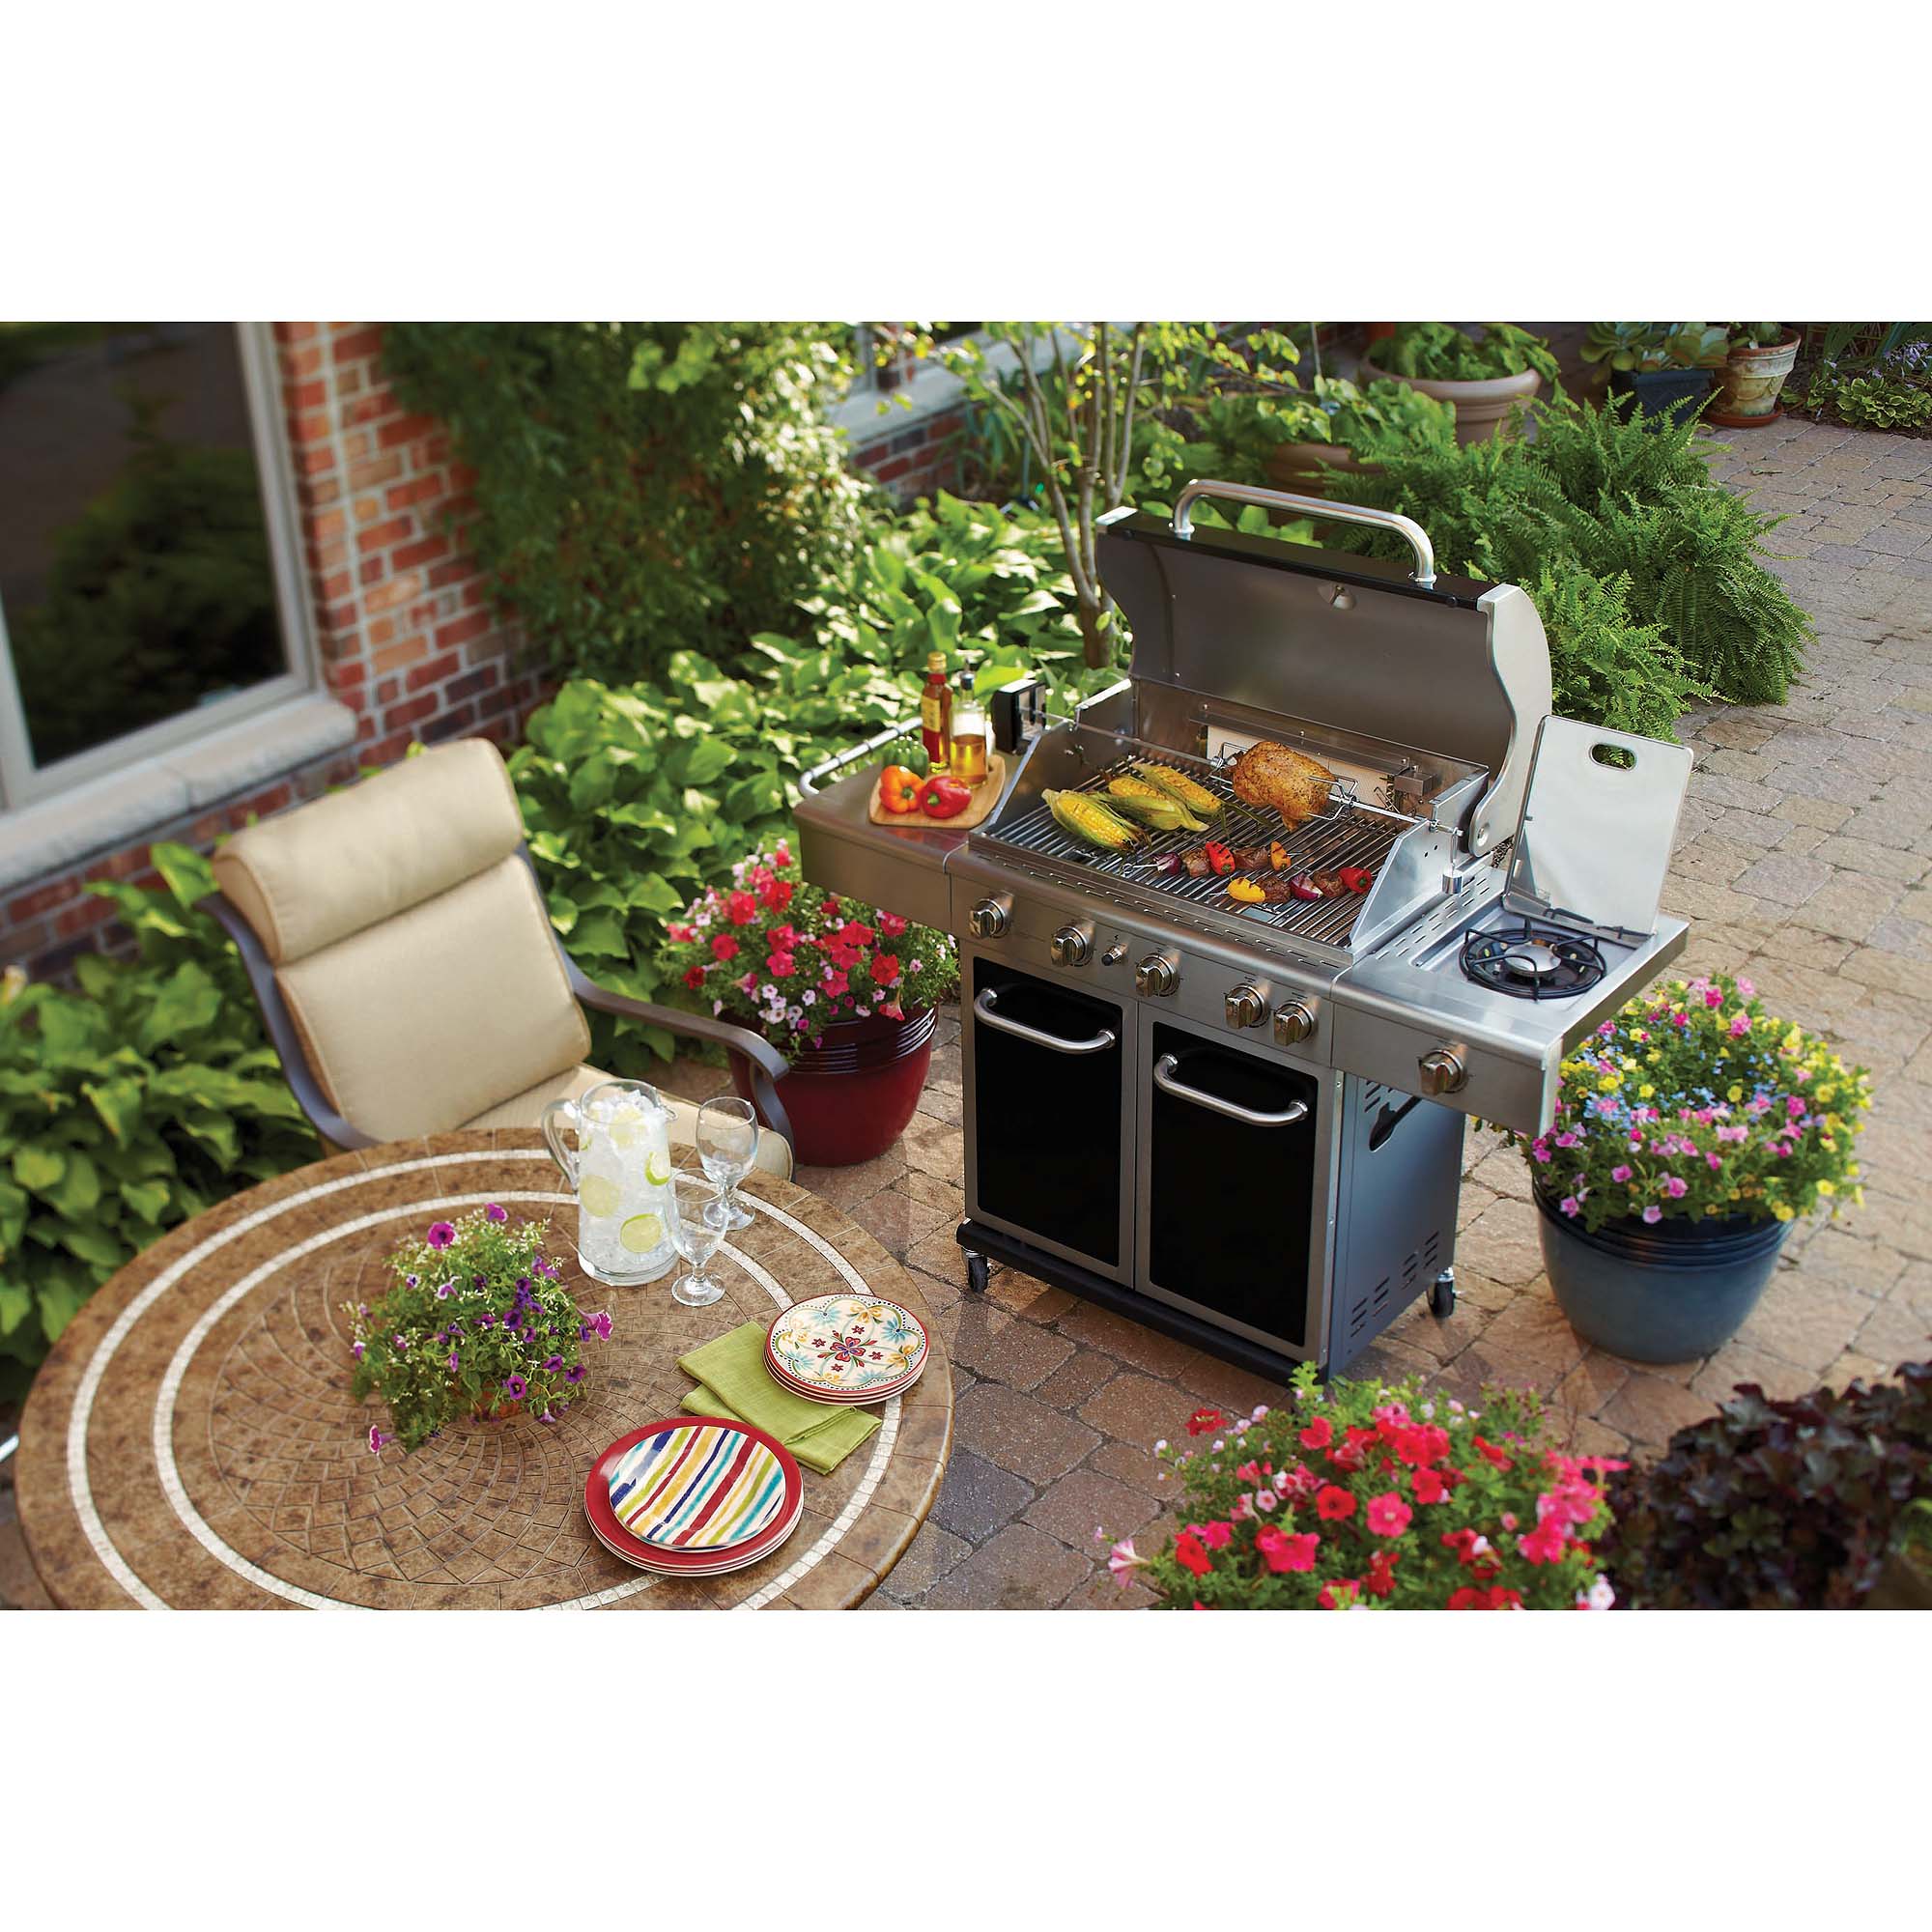 Better Homes and Gardens 5-Burner Gas Grill, Black - image 1 of 6